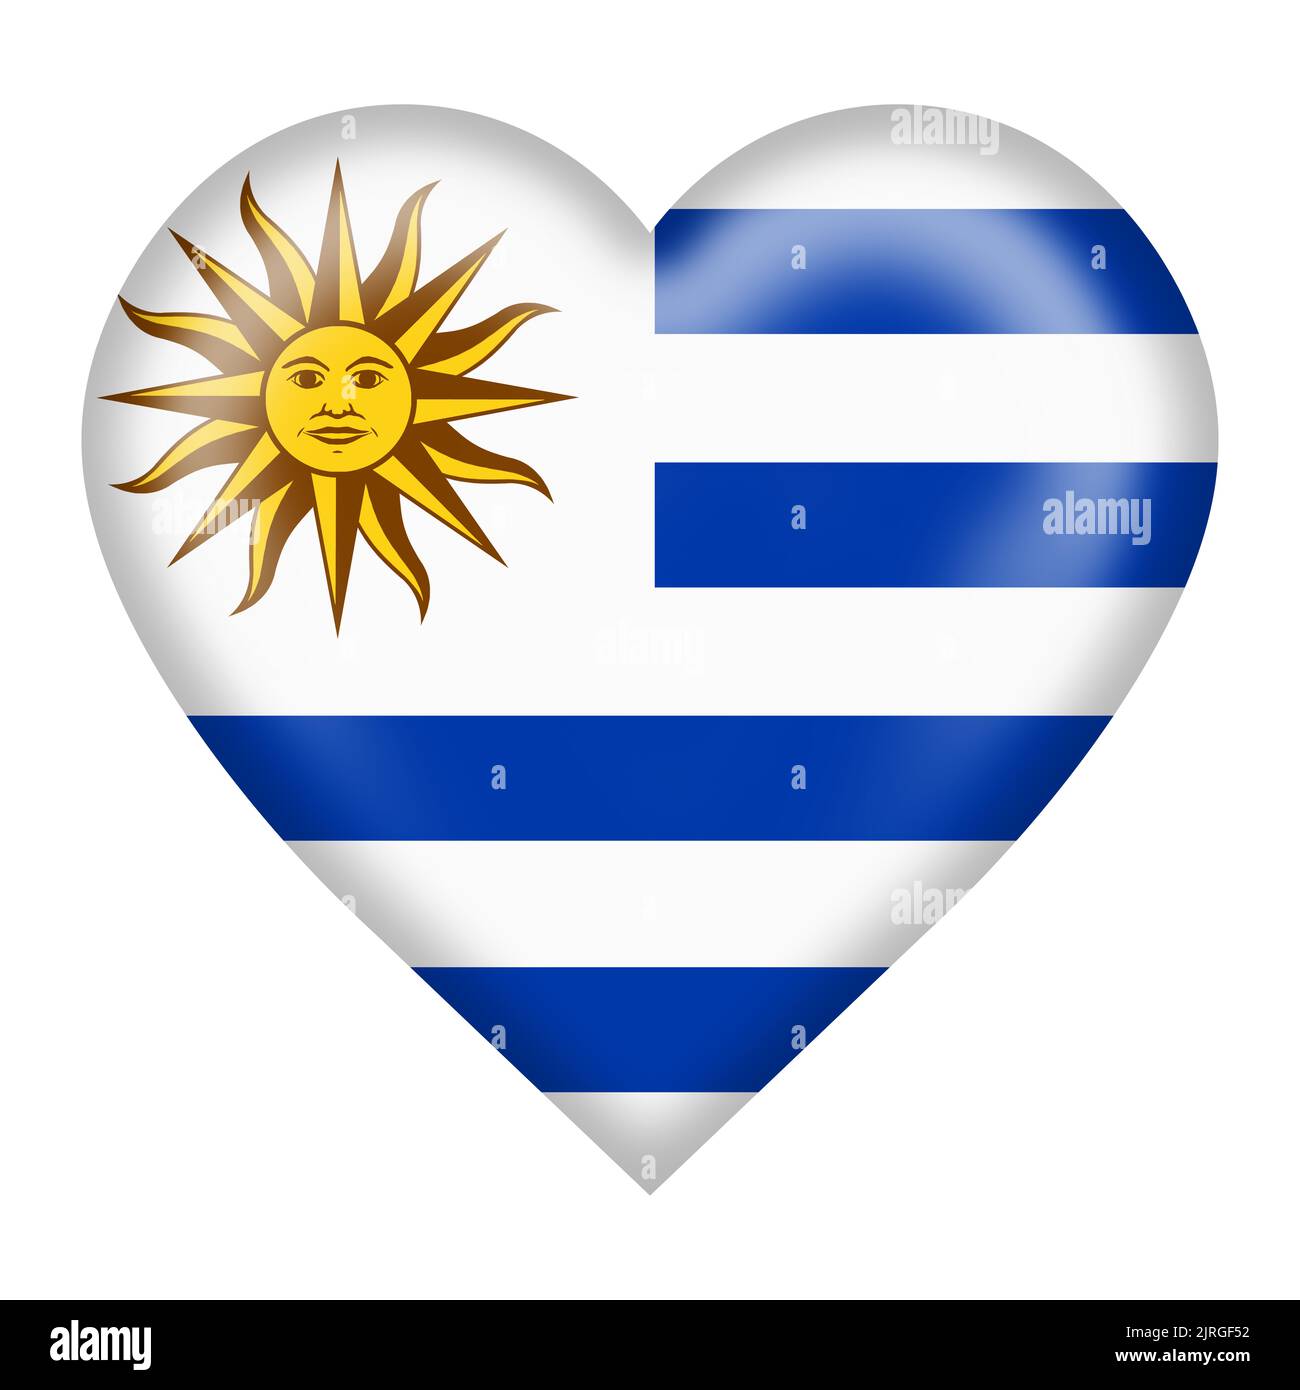 Uruguay flag heart button 3d illustration isolated on white with clipping path Stock Photo